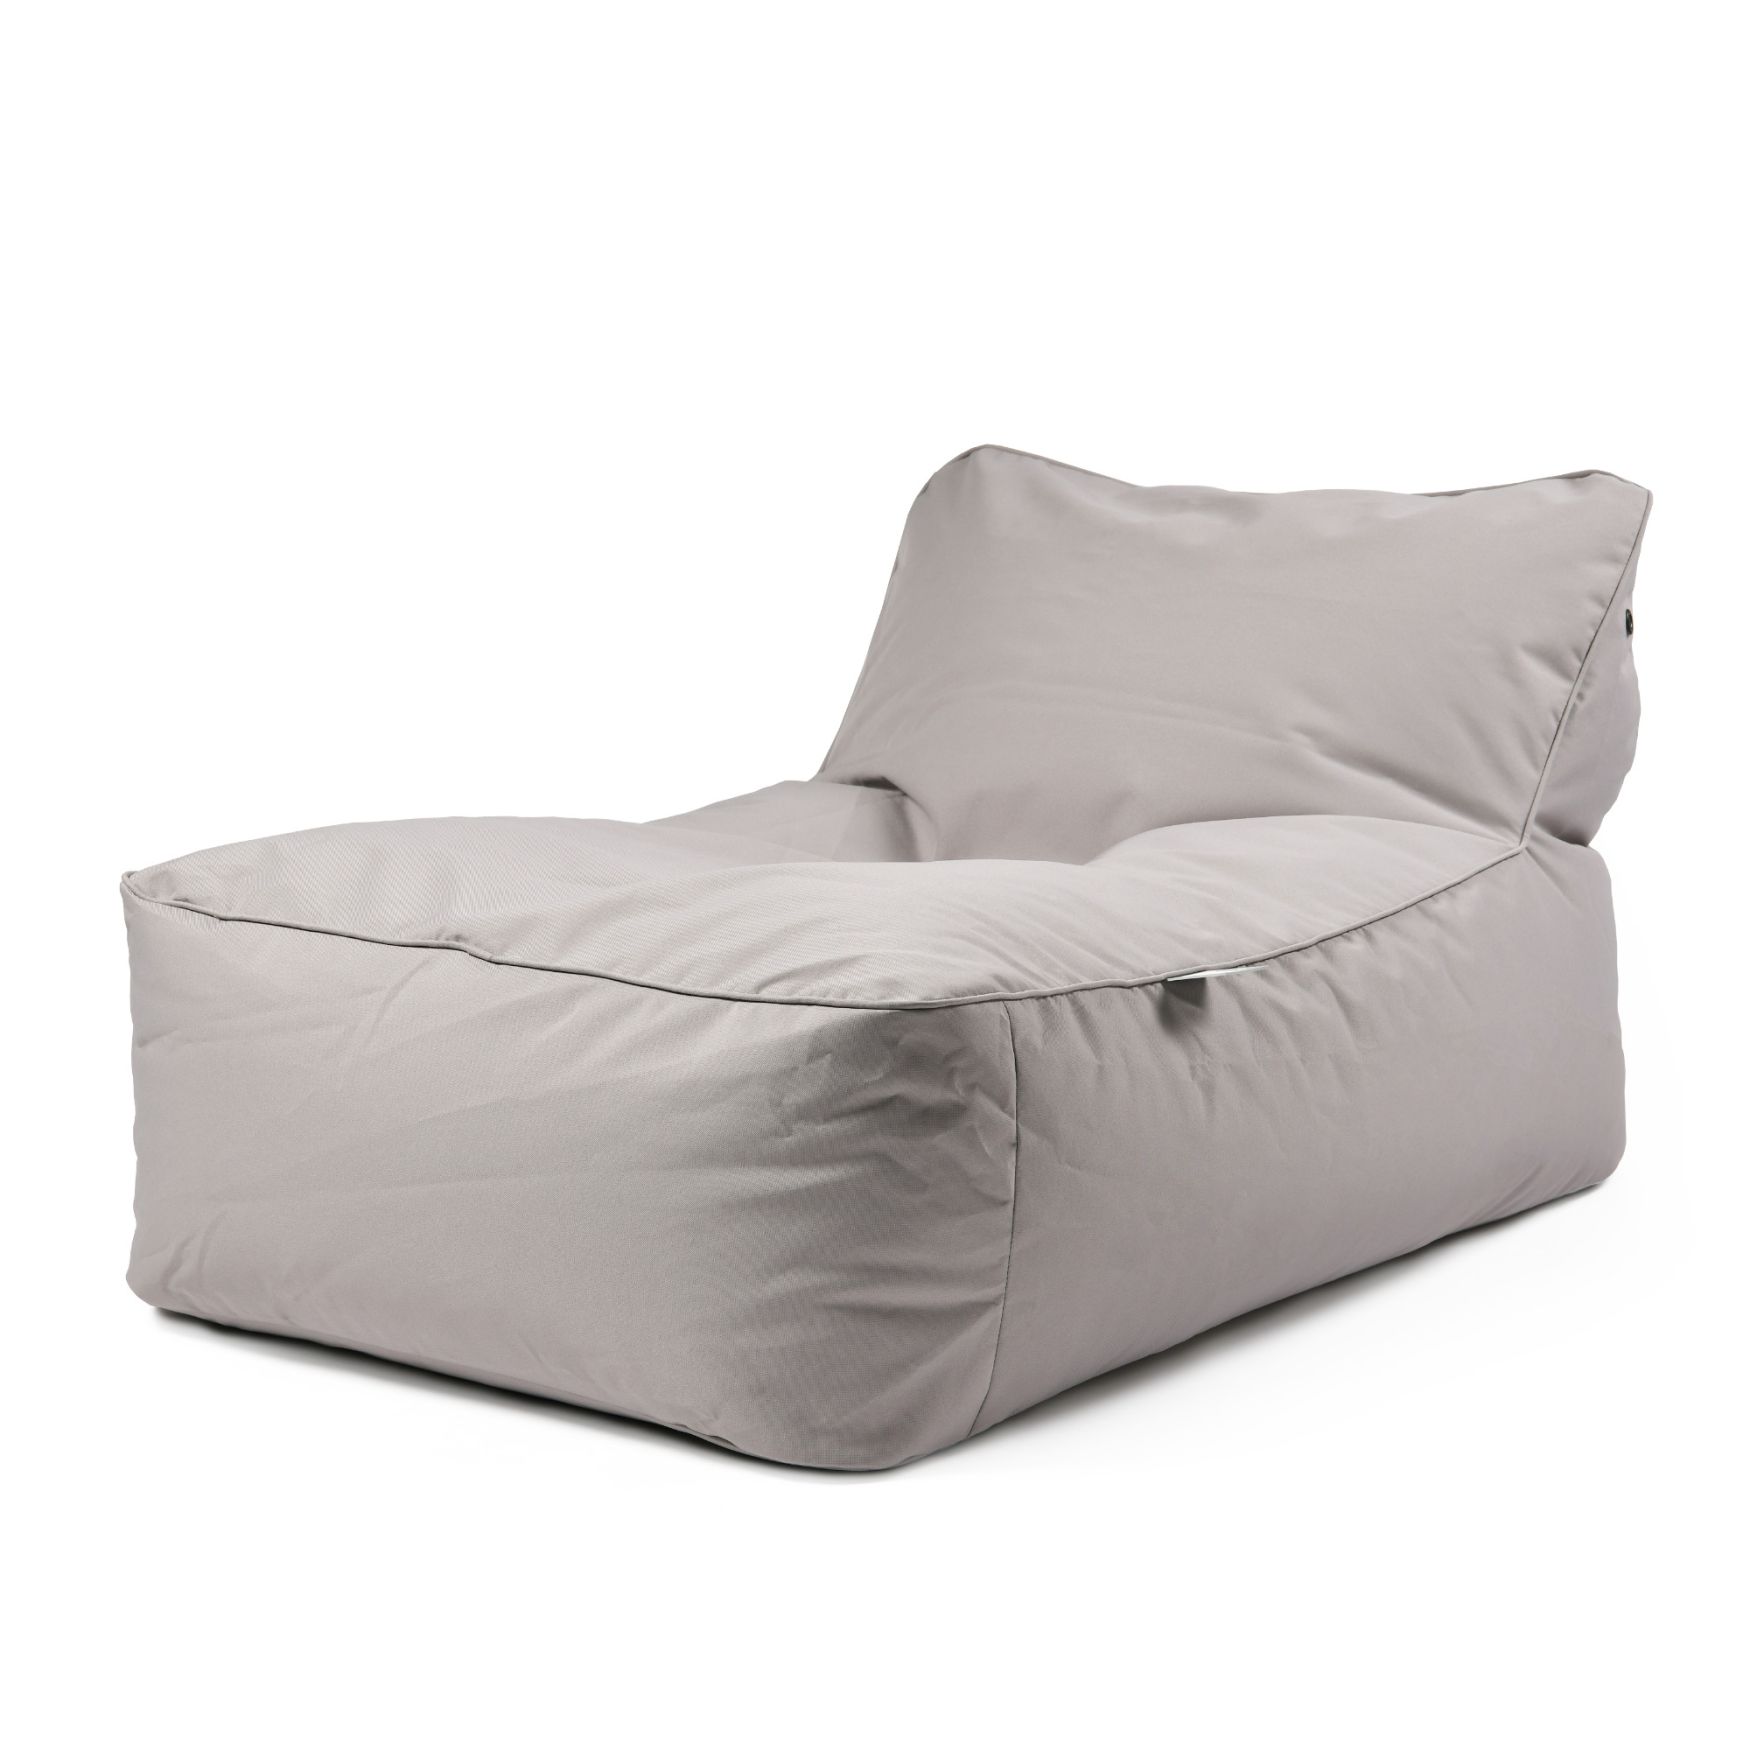 extreme lounging bbed lounger loungebed silver grey